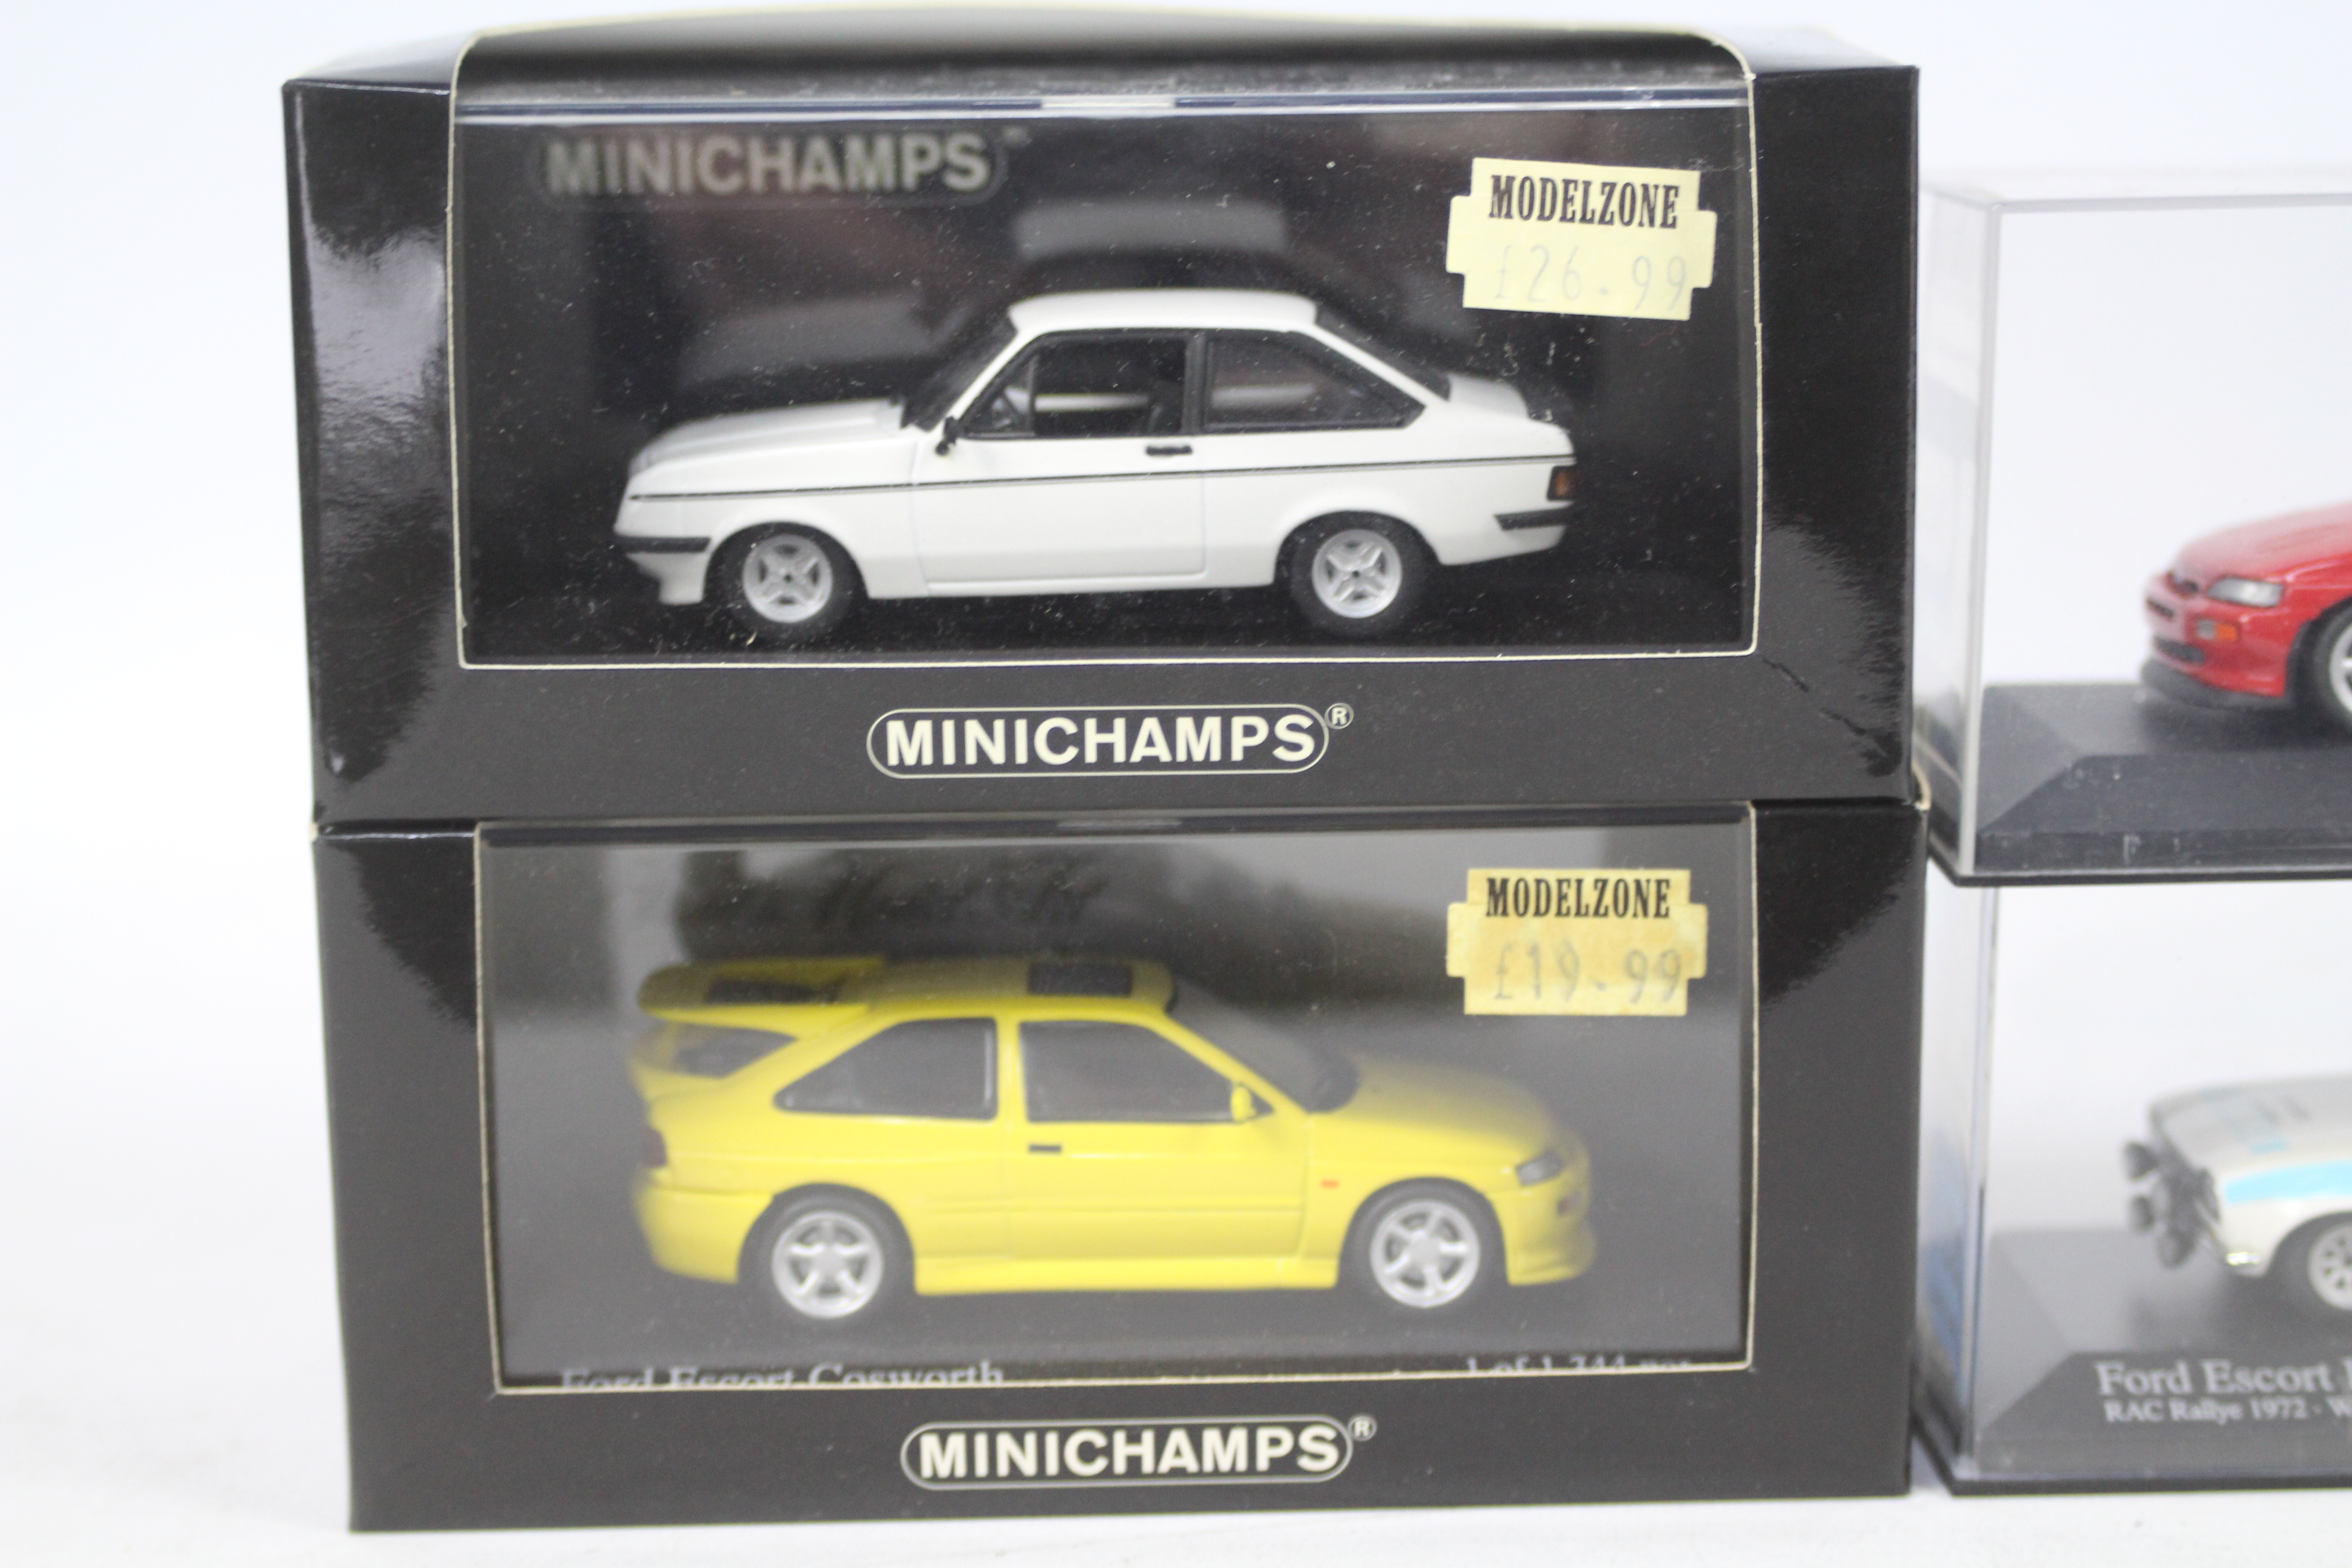 Minichamps - 4 x boxed 1:43 scale Ford Escort models, - Image 2 of 3